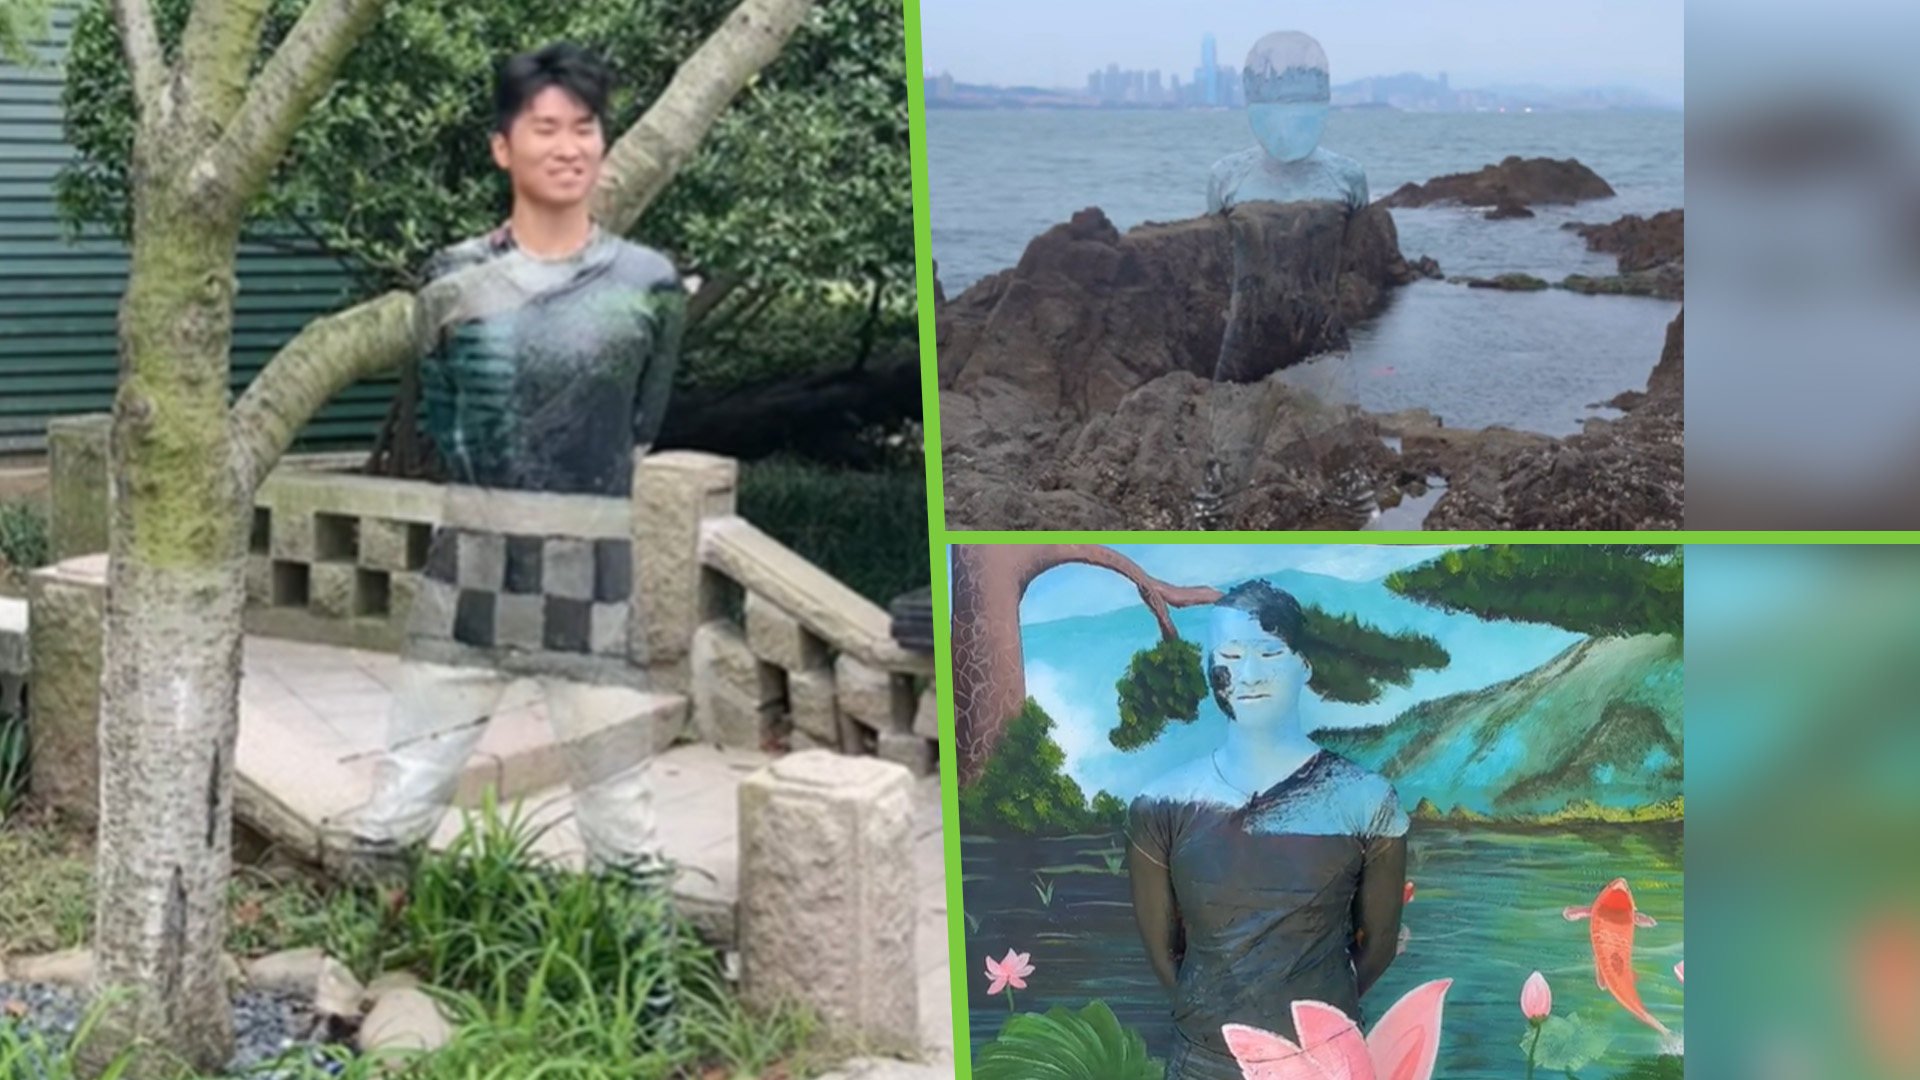 An eco-friendly artist in China, known as the “invisible man” for painting himself, chameleon-like, into the background of natural scenes has become a hit on mainland social media. Photo: SCMP composite/Douyin